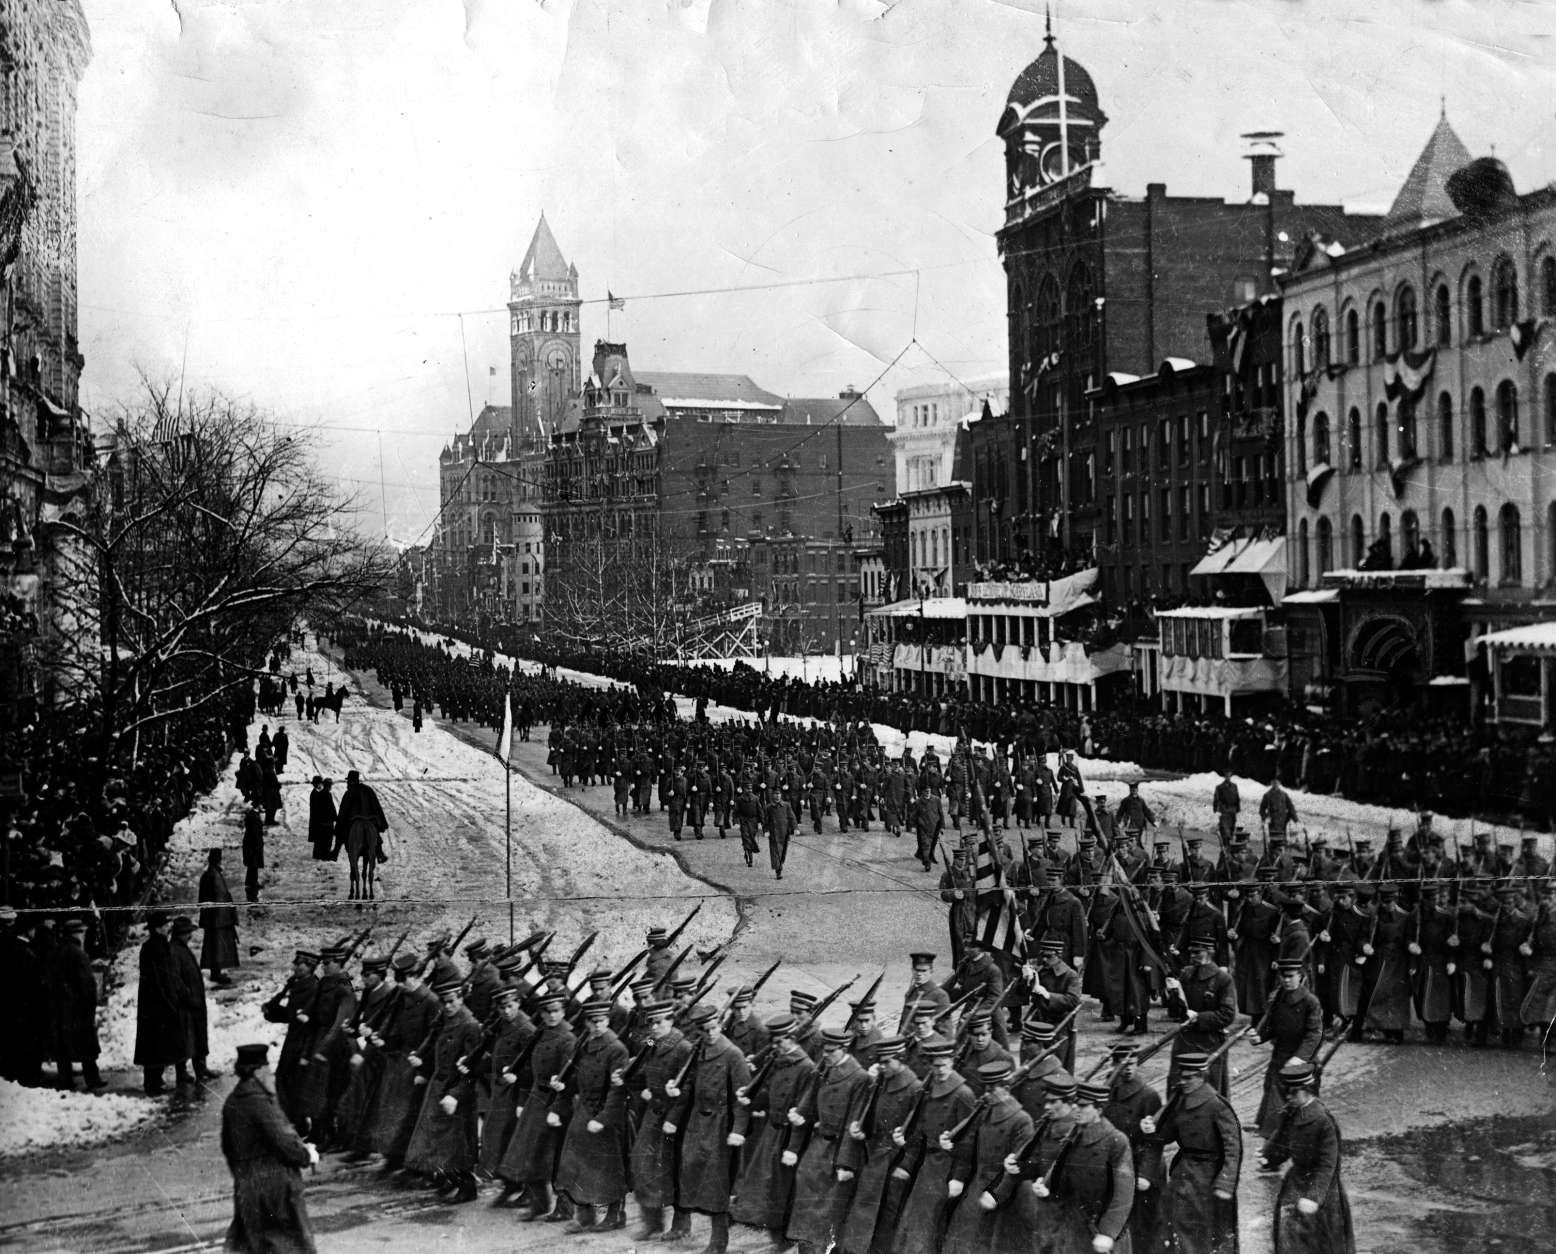 The inaugural procession for President William Howard Taft takes place in Washington, D.C., on March 4, 1909.   (AP Photo)